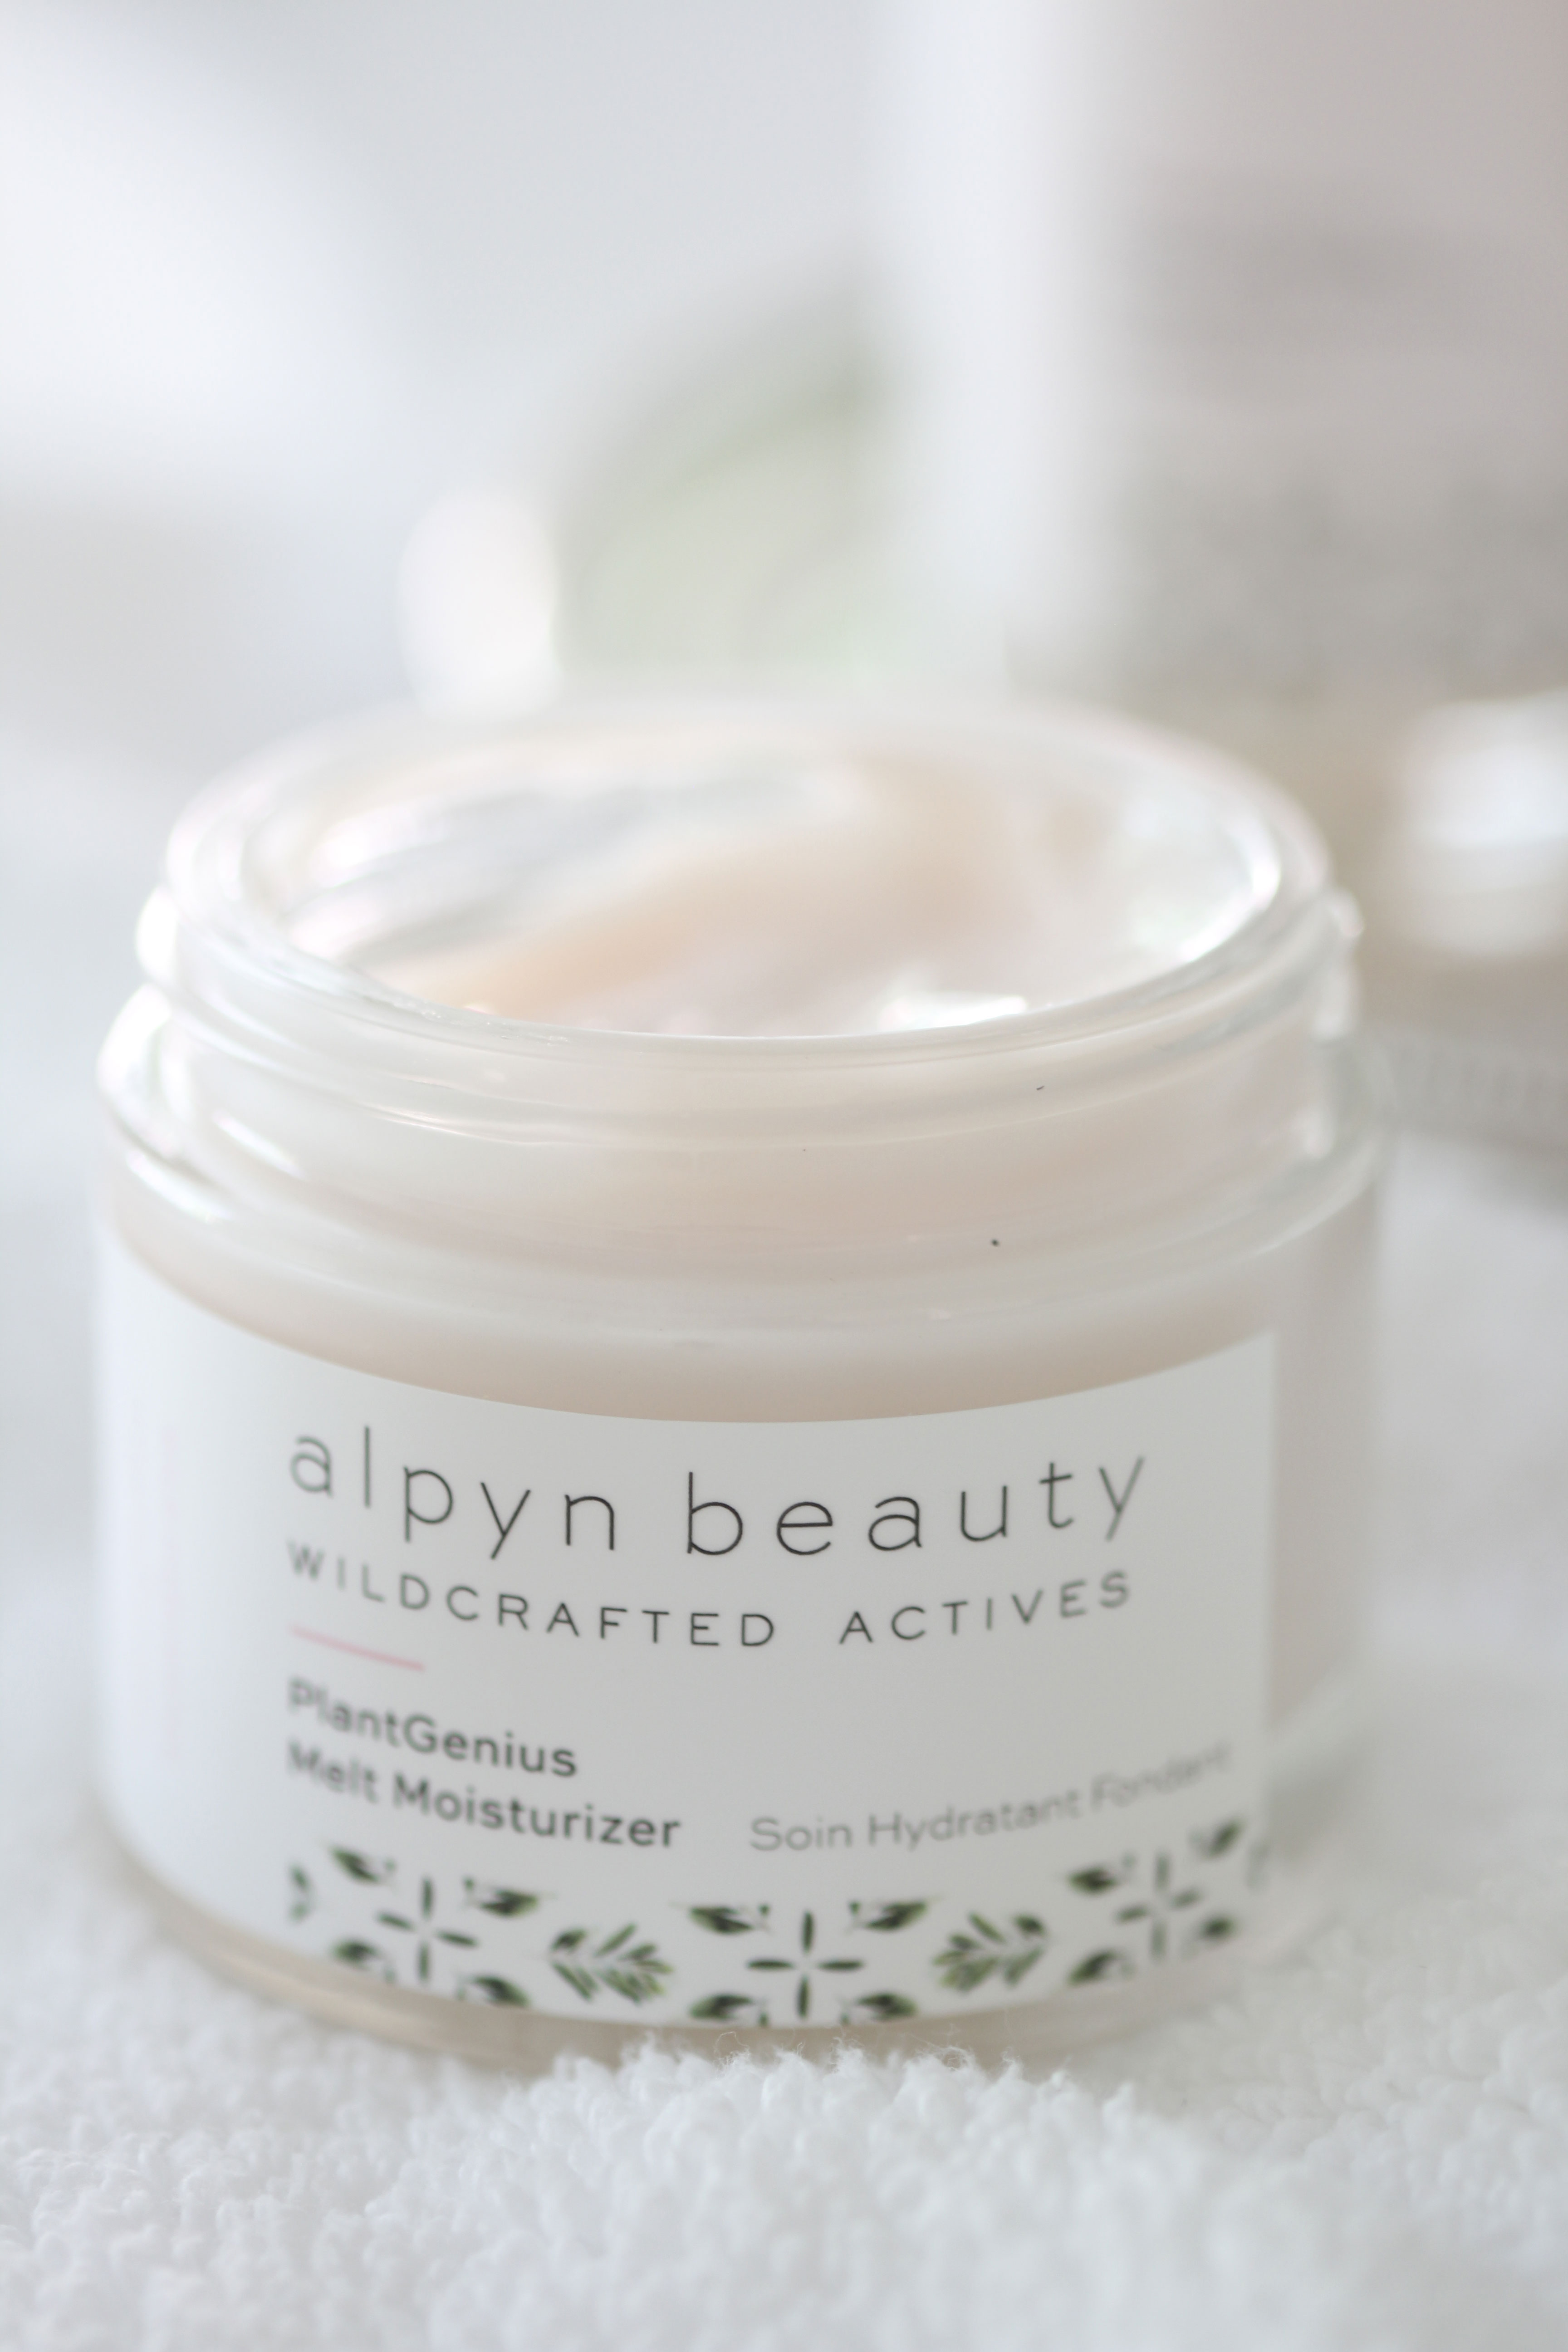 Treat your skin to them best clean beauty products from Alpyn Beauty! Includes a moisturizer that fortifies, maintains, and repairs skin’s natural moisture barrier.